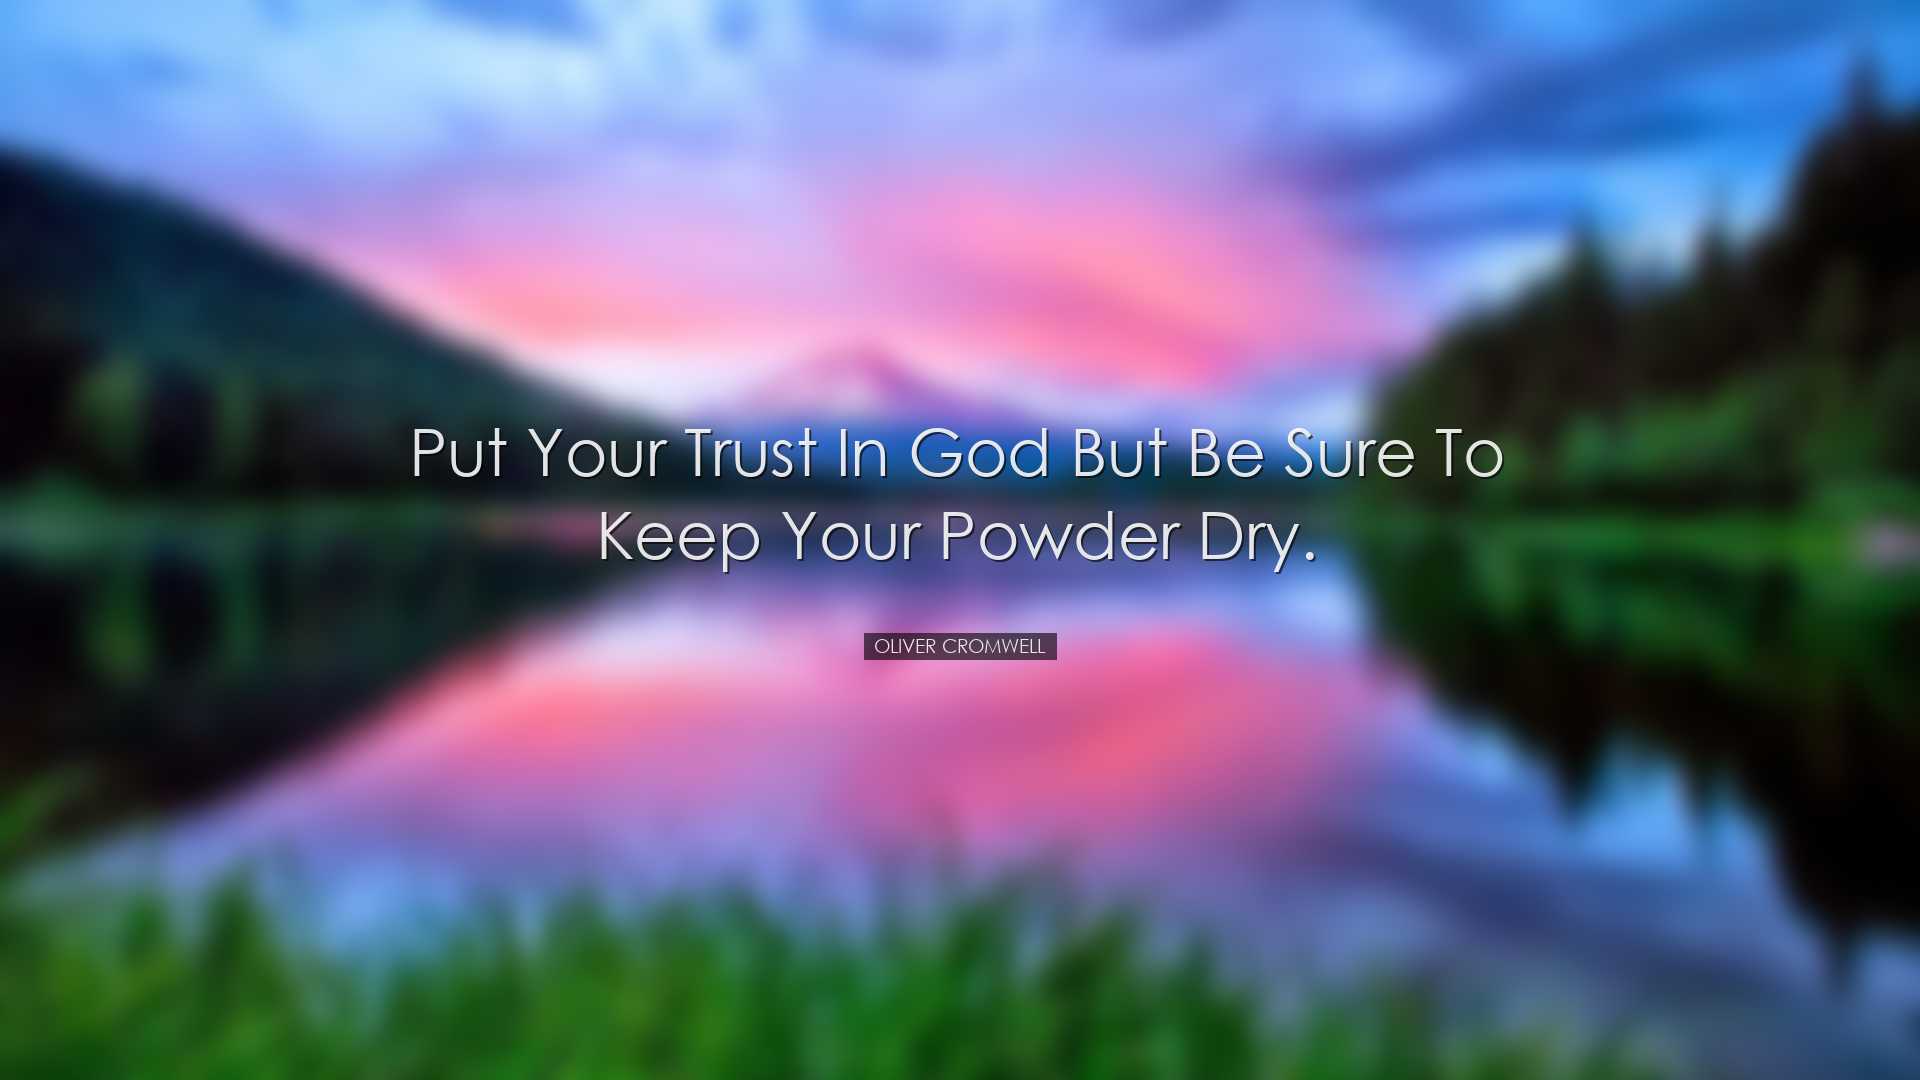 Put your trust in God but be sure to keep your powder dry. - Olive